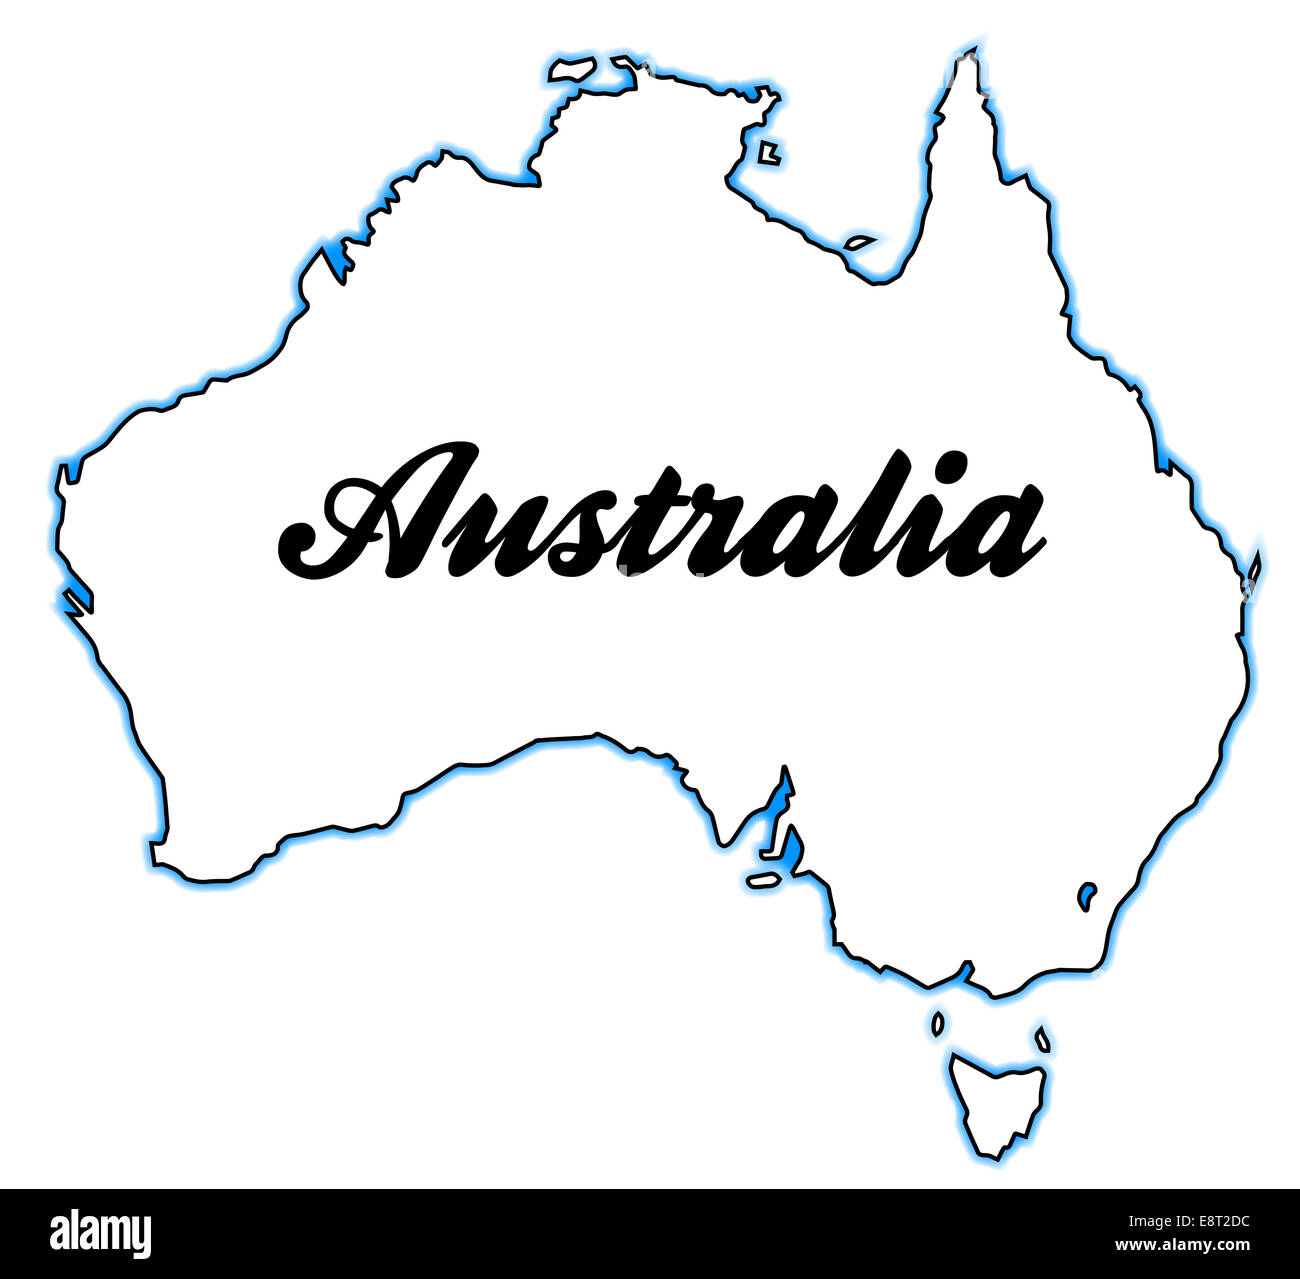 Outline map of Australia over a white background Stock Photo